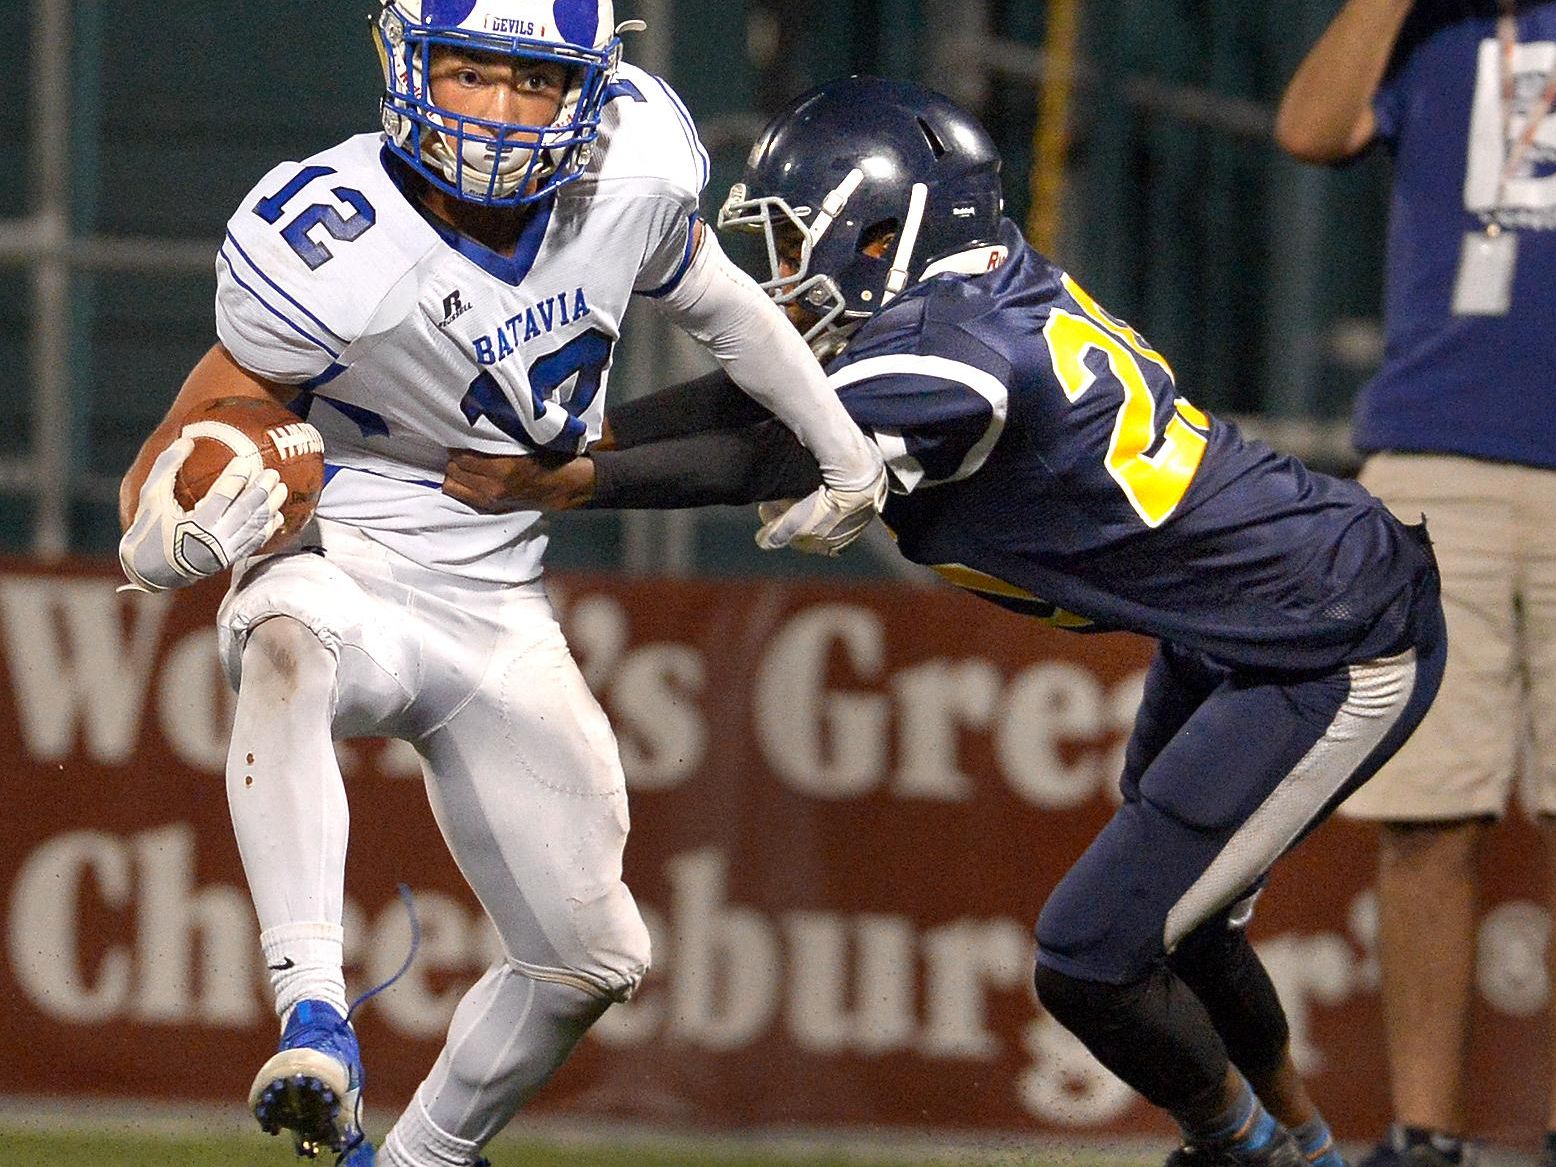 Batavia's Chandler Baker, left, breaks the grasp of University Prep's Cassisus Facen on his way to the Blue Devils' second touchdown at Rhinos Stadium on Friday.